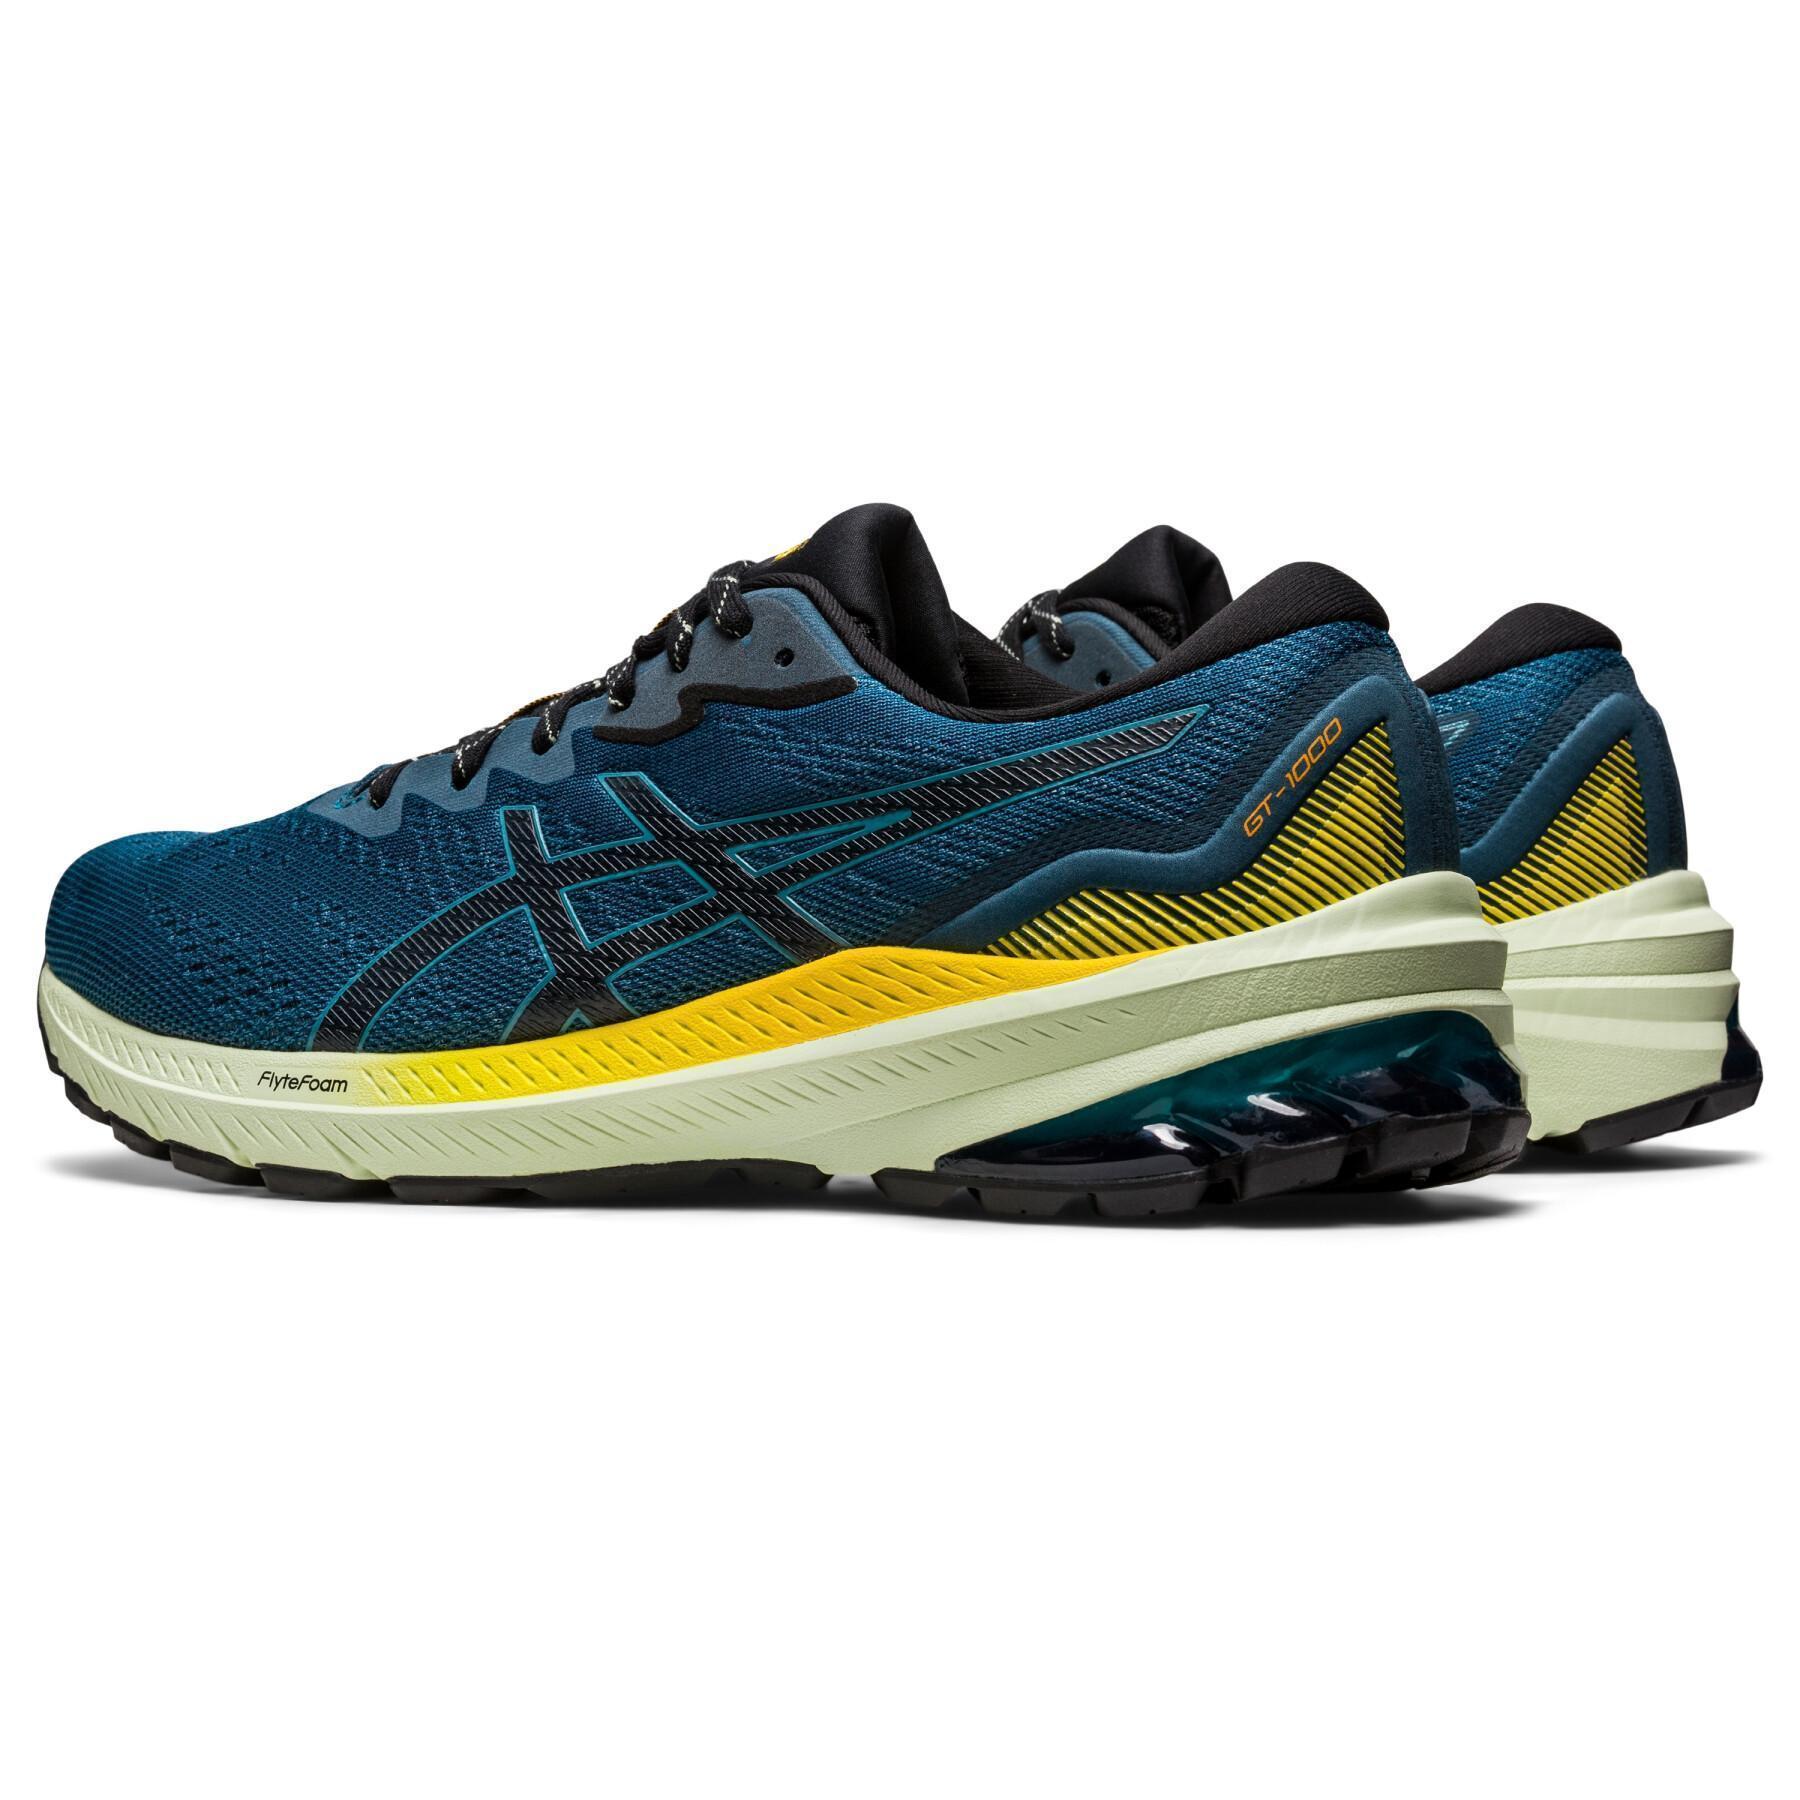 Shoes from running Asics Gt-1000 11 TR